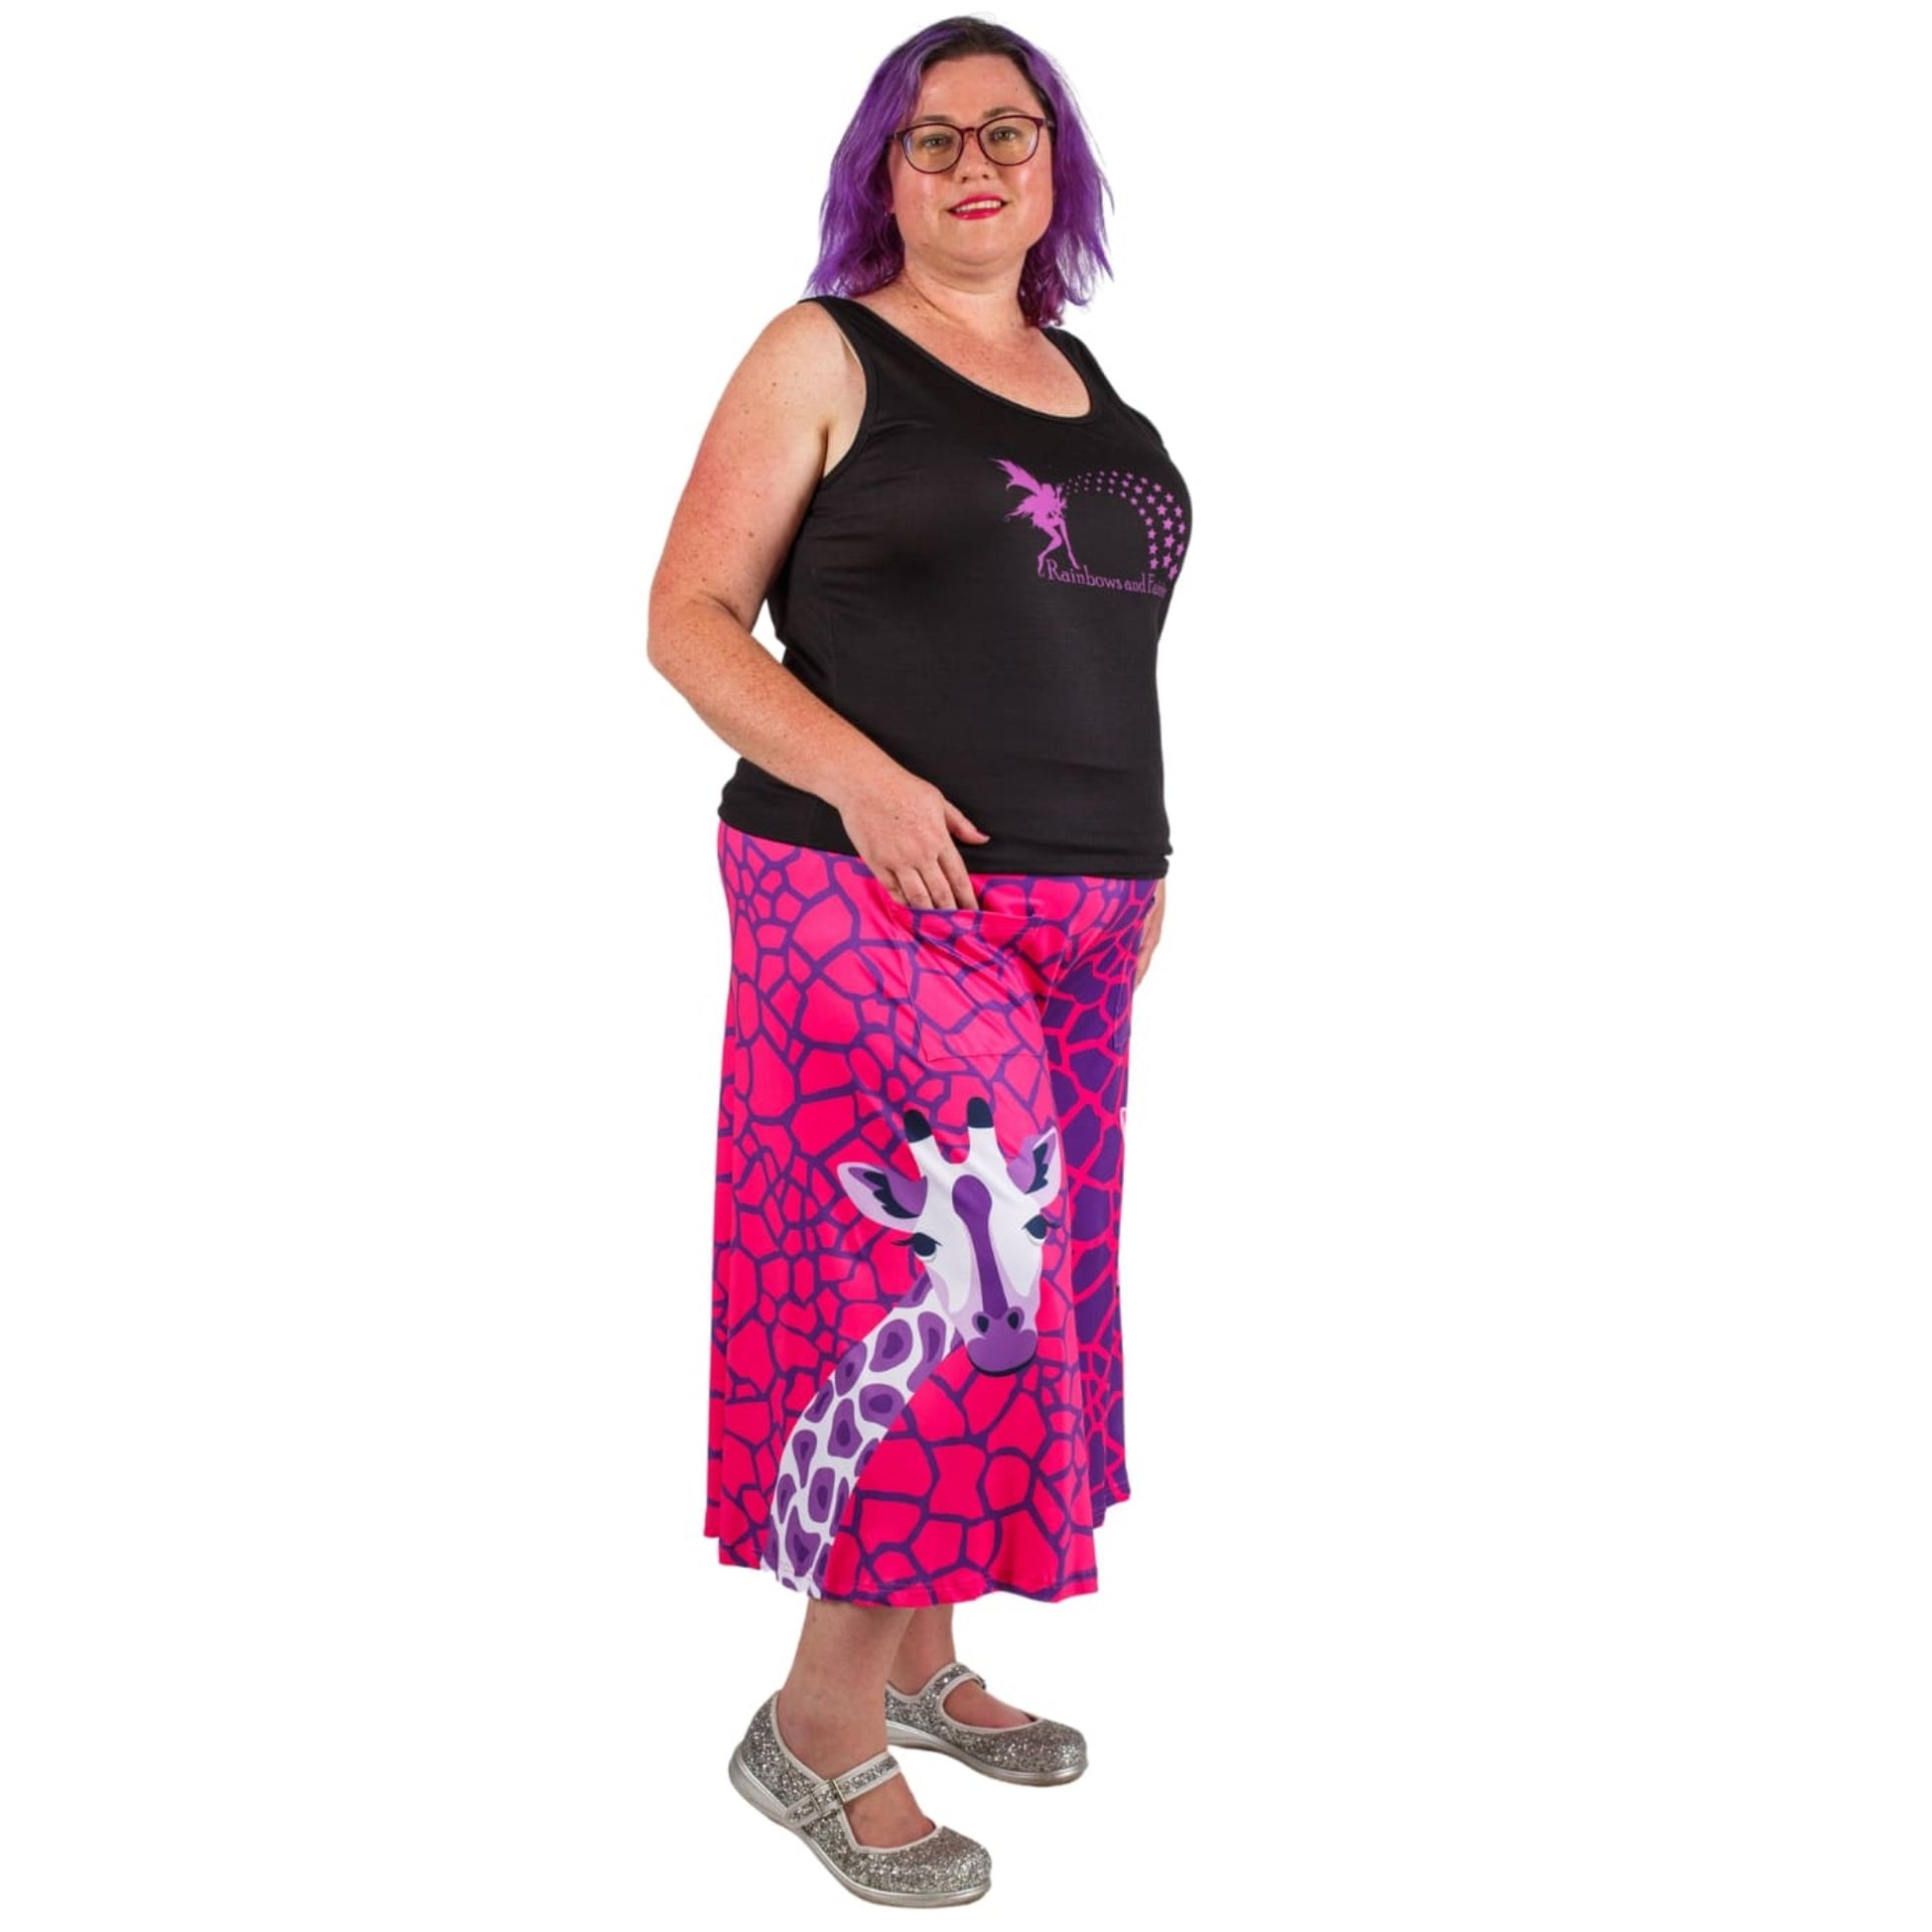 Andy Culottes by RainbowsAndFairies.com (Giraffe - Pink & Purple - Jungle - 3 Quarter Pants - Rockabilly - Vintage Inspired) - SKU: CL_CULTS_ANDYG_PNK - Pic 05